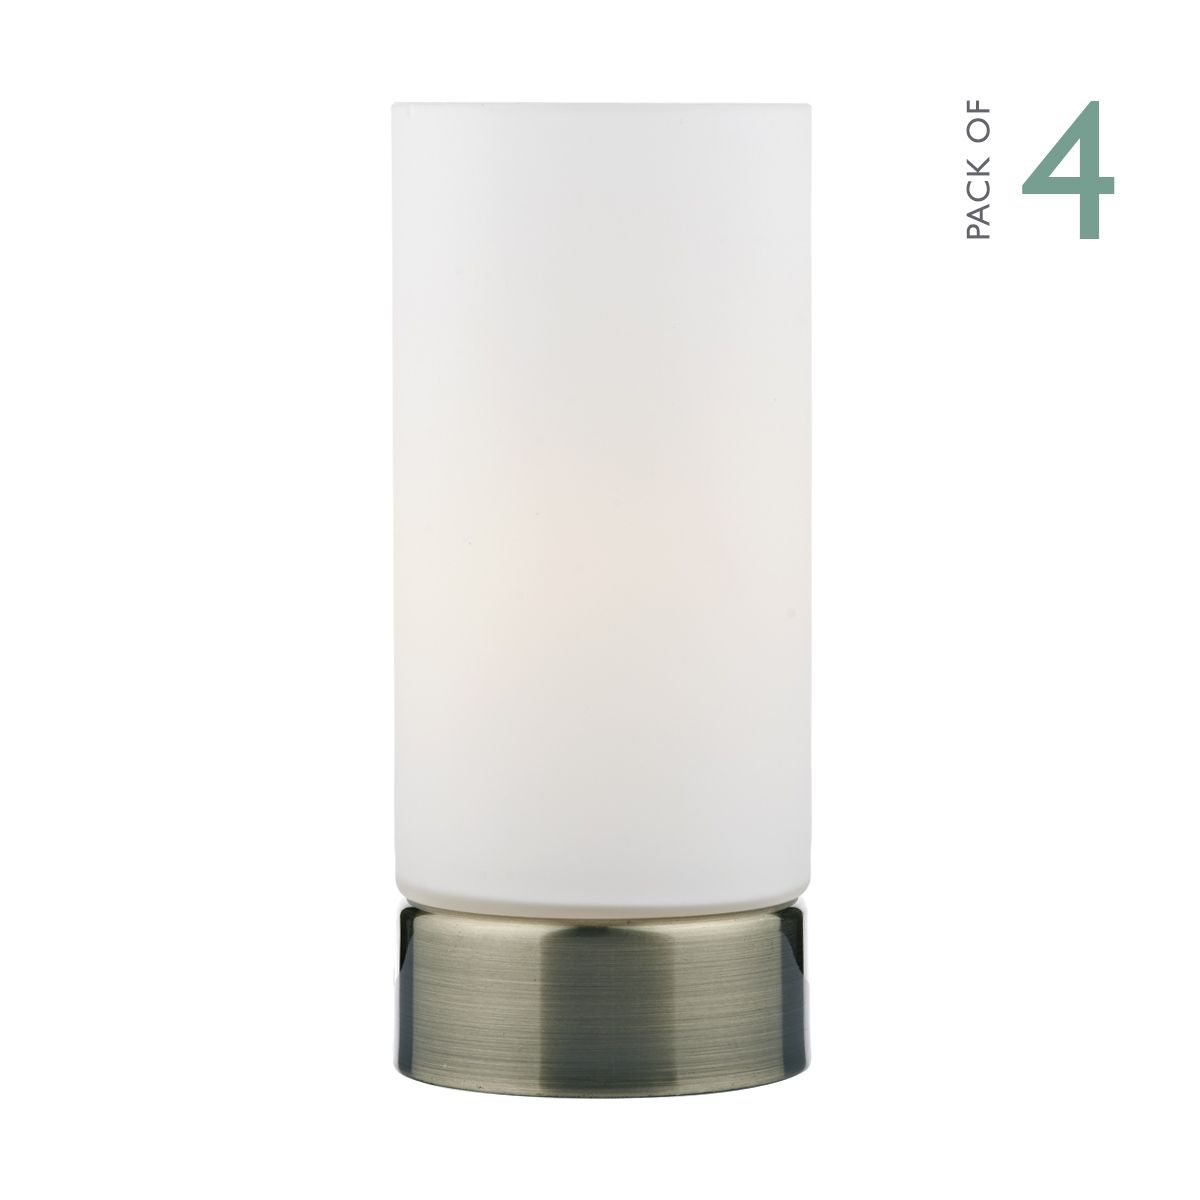 Owen Touch Round Glass Table Lamp, Round Glass Table Lamp Uk